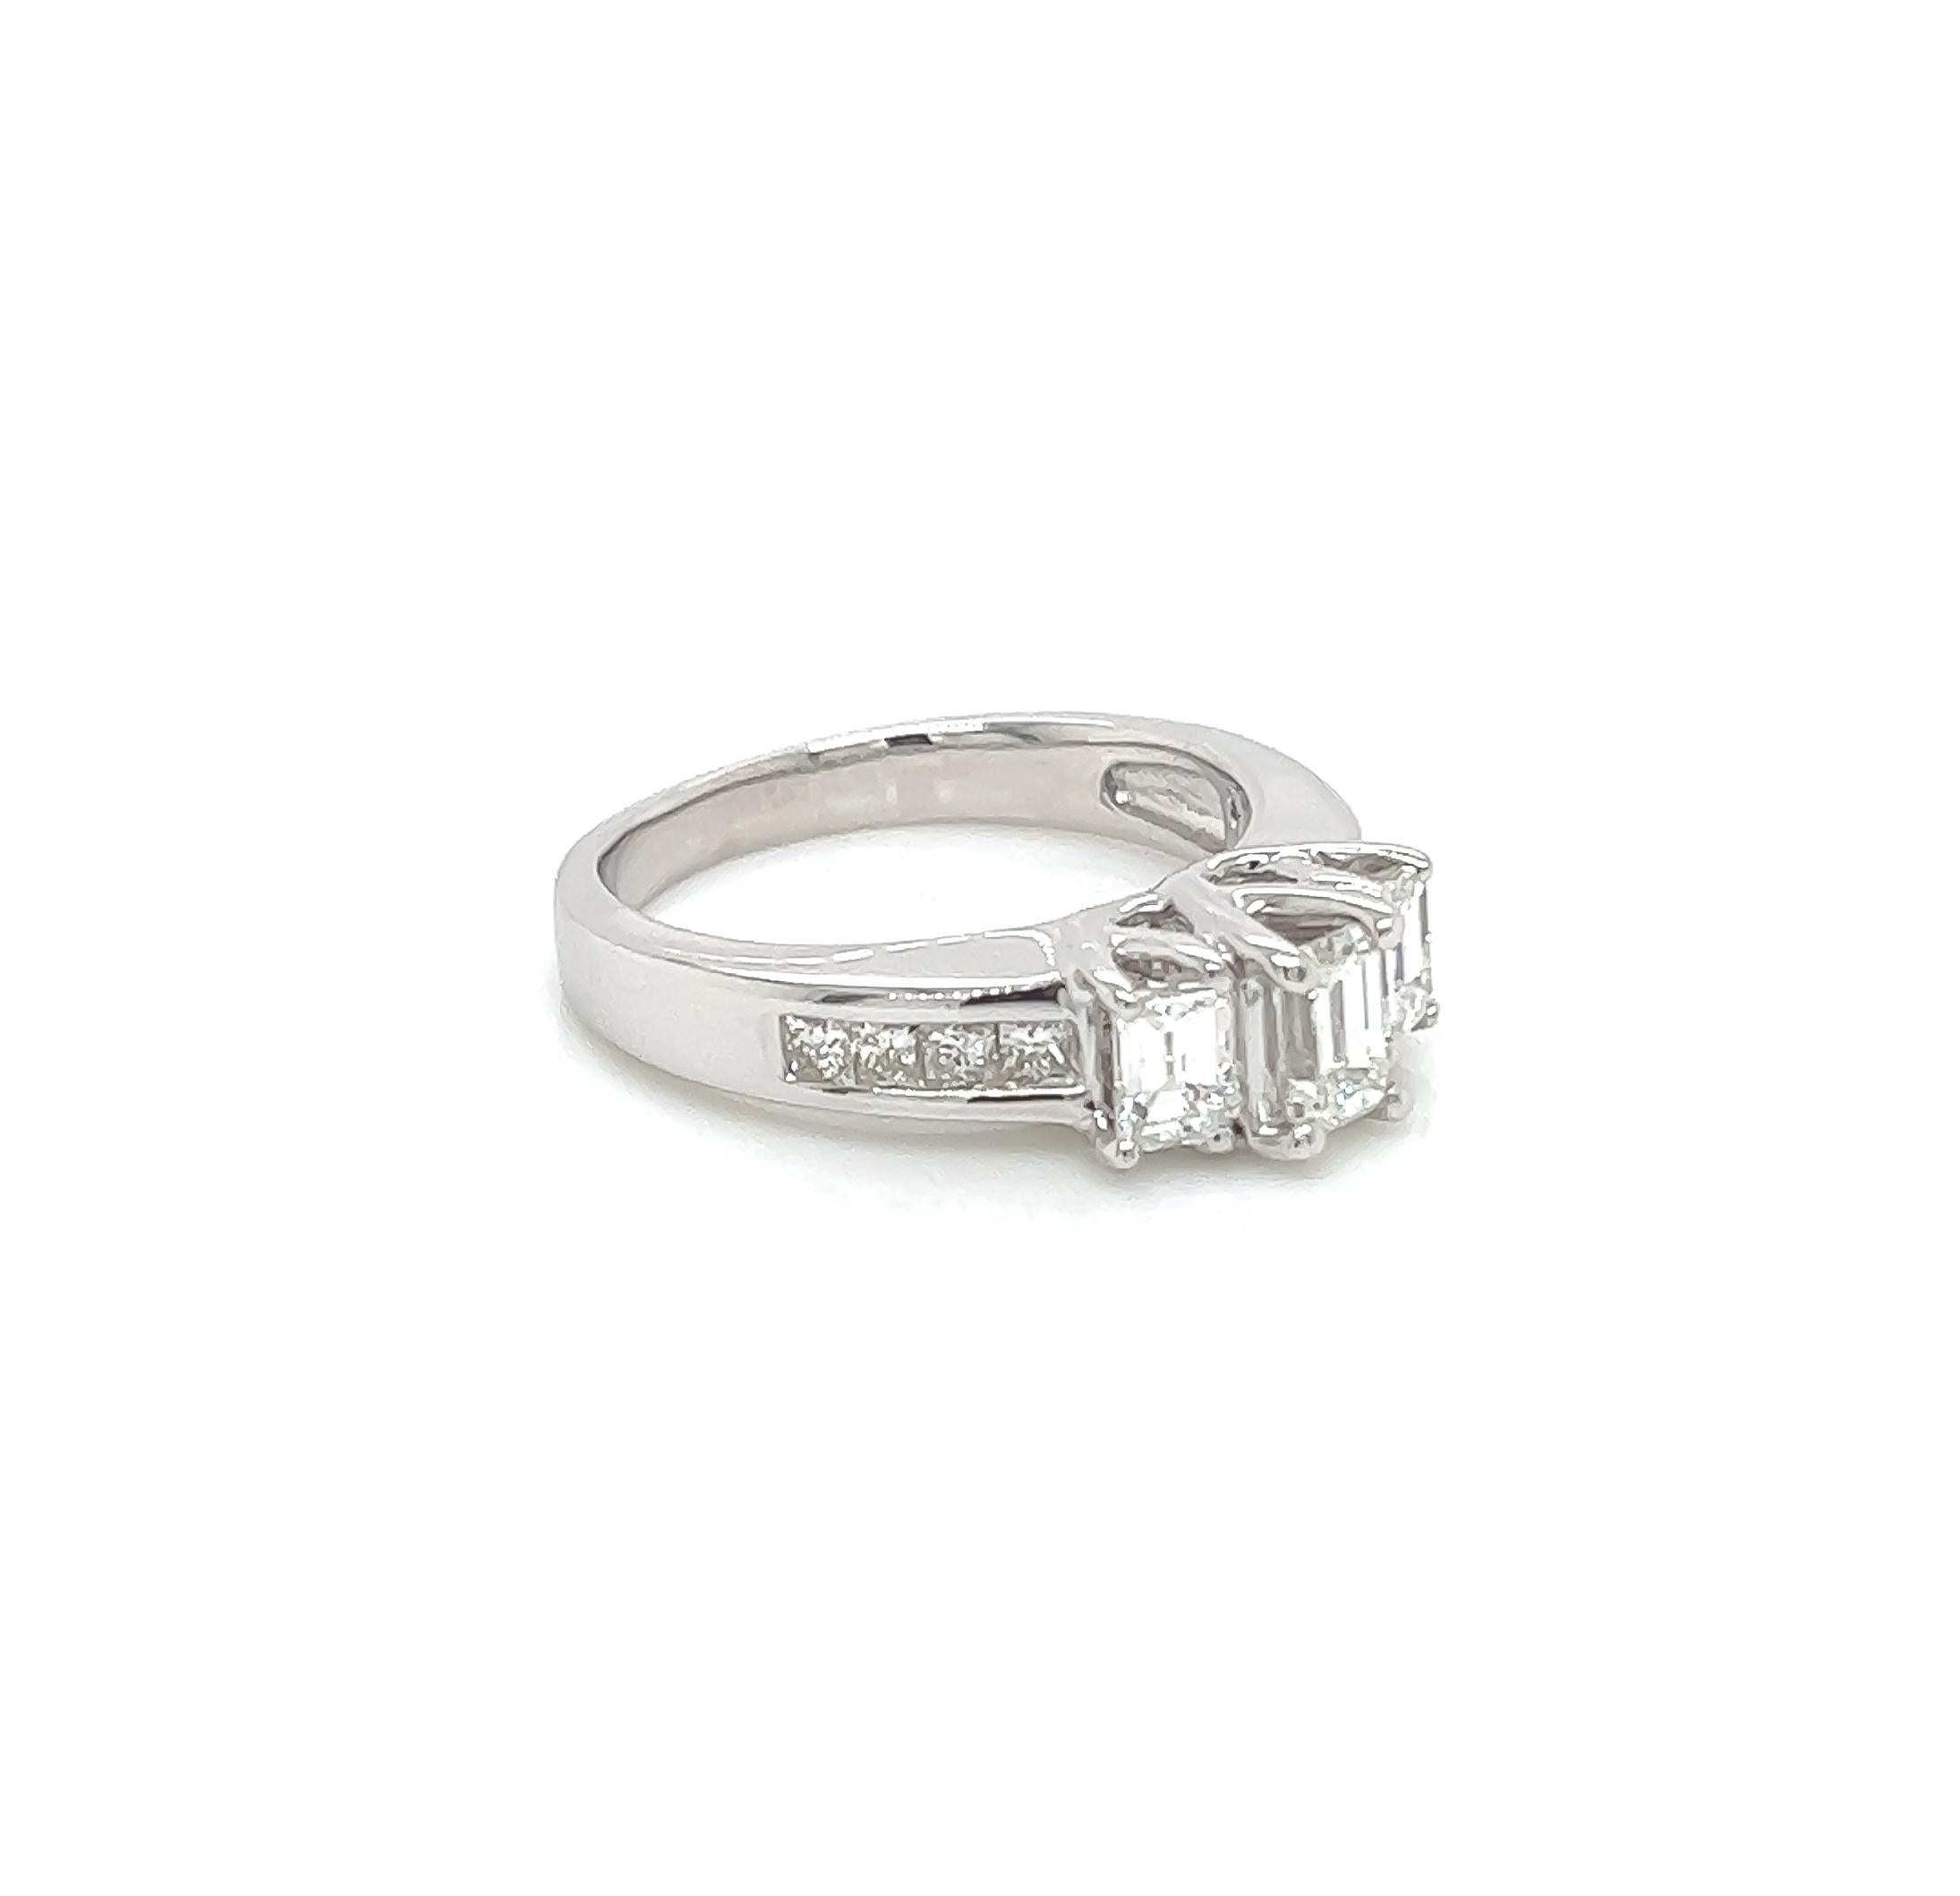 1.30 Total Carat Emerald Cut Three-Stone Engagement Ring H VS2/SI

Beautiful engagement ring for your beloved. The clean cut of the emerald and princess diamonds makes for a strong reminder of your love for your significant other. It is a solid